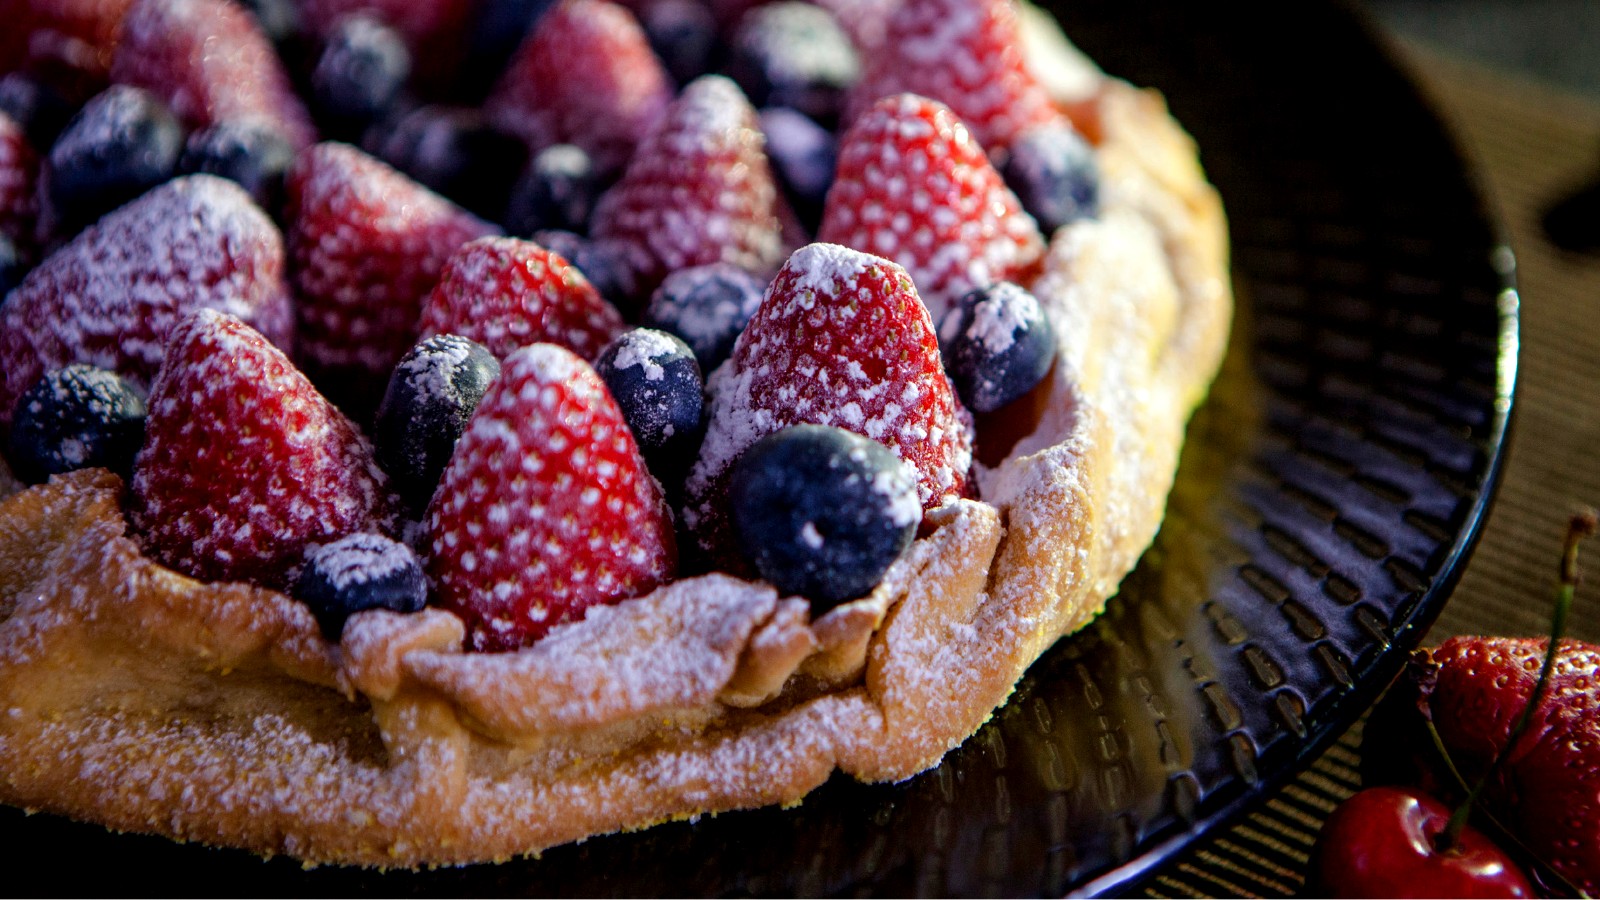 Image of Strawberry Blueberry Galette